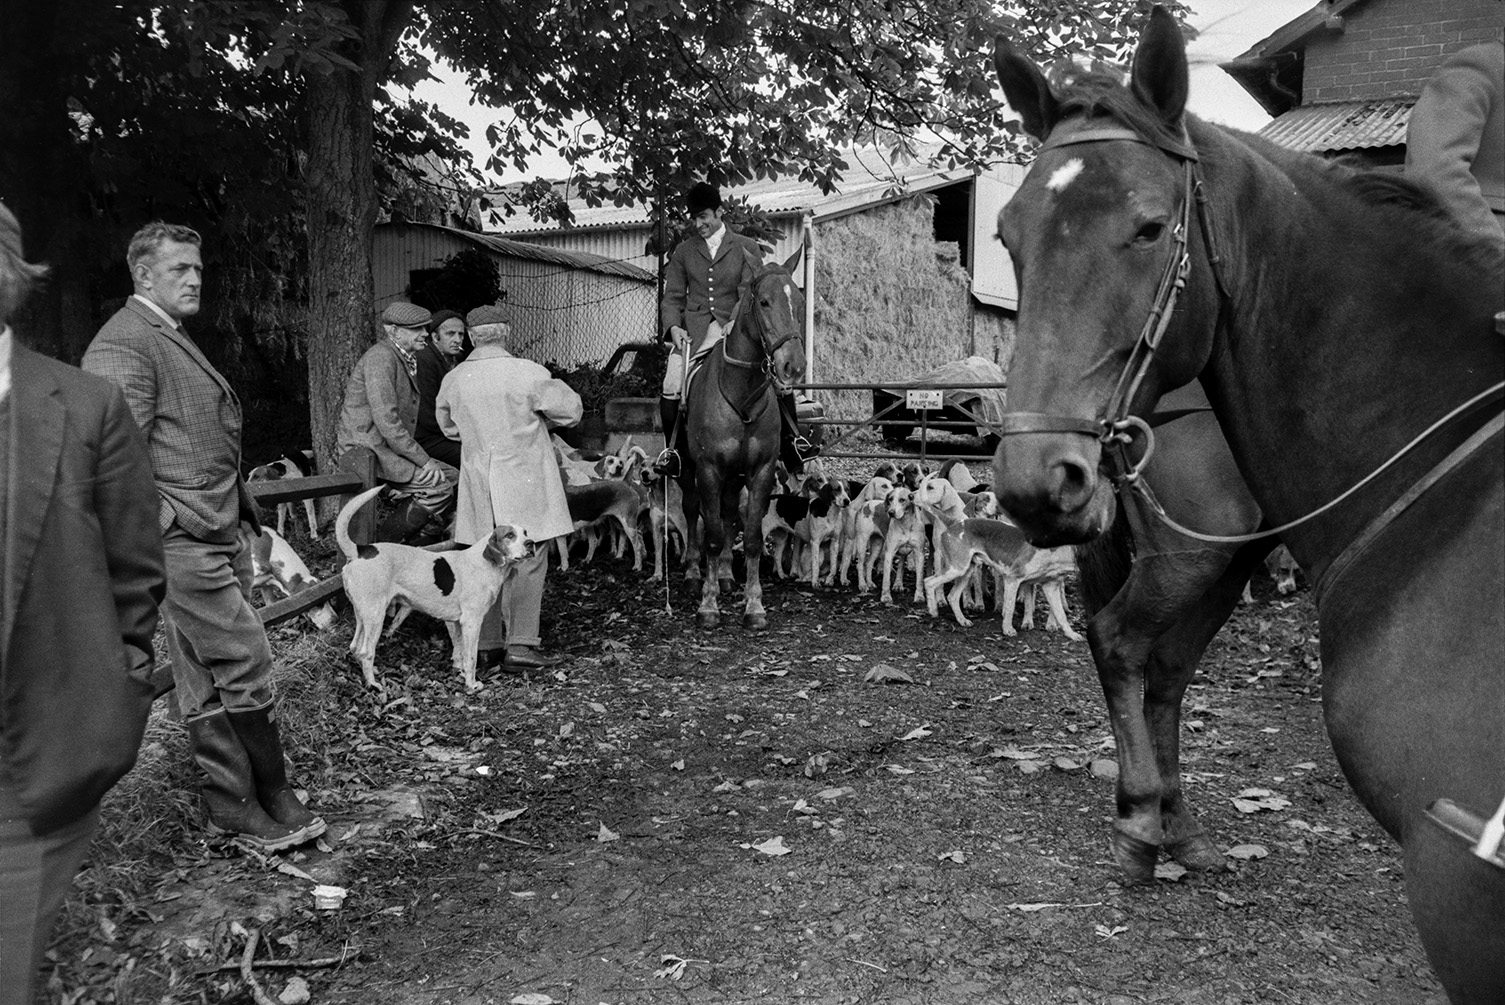 Tavistock Staghound hunt meet at a farm in Lapford before setting off on a hunt. They are gathered by a field gate under a tree. Mounted huntsmen, hounds and hunt followers are visible, as well as barns with hay bales in the background.